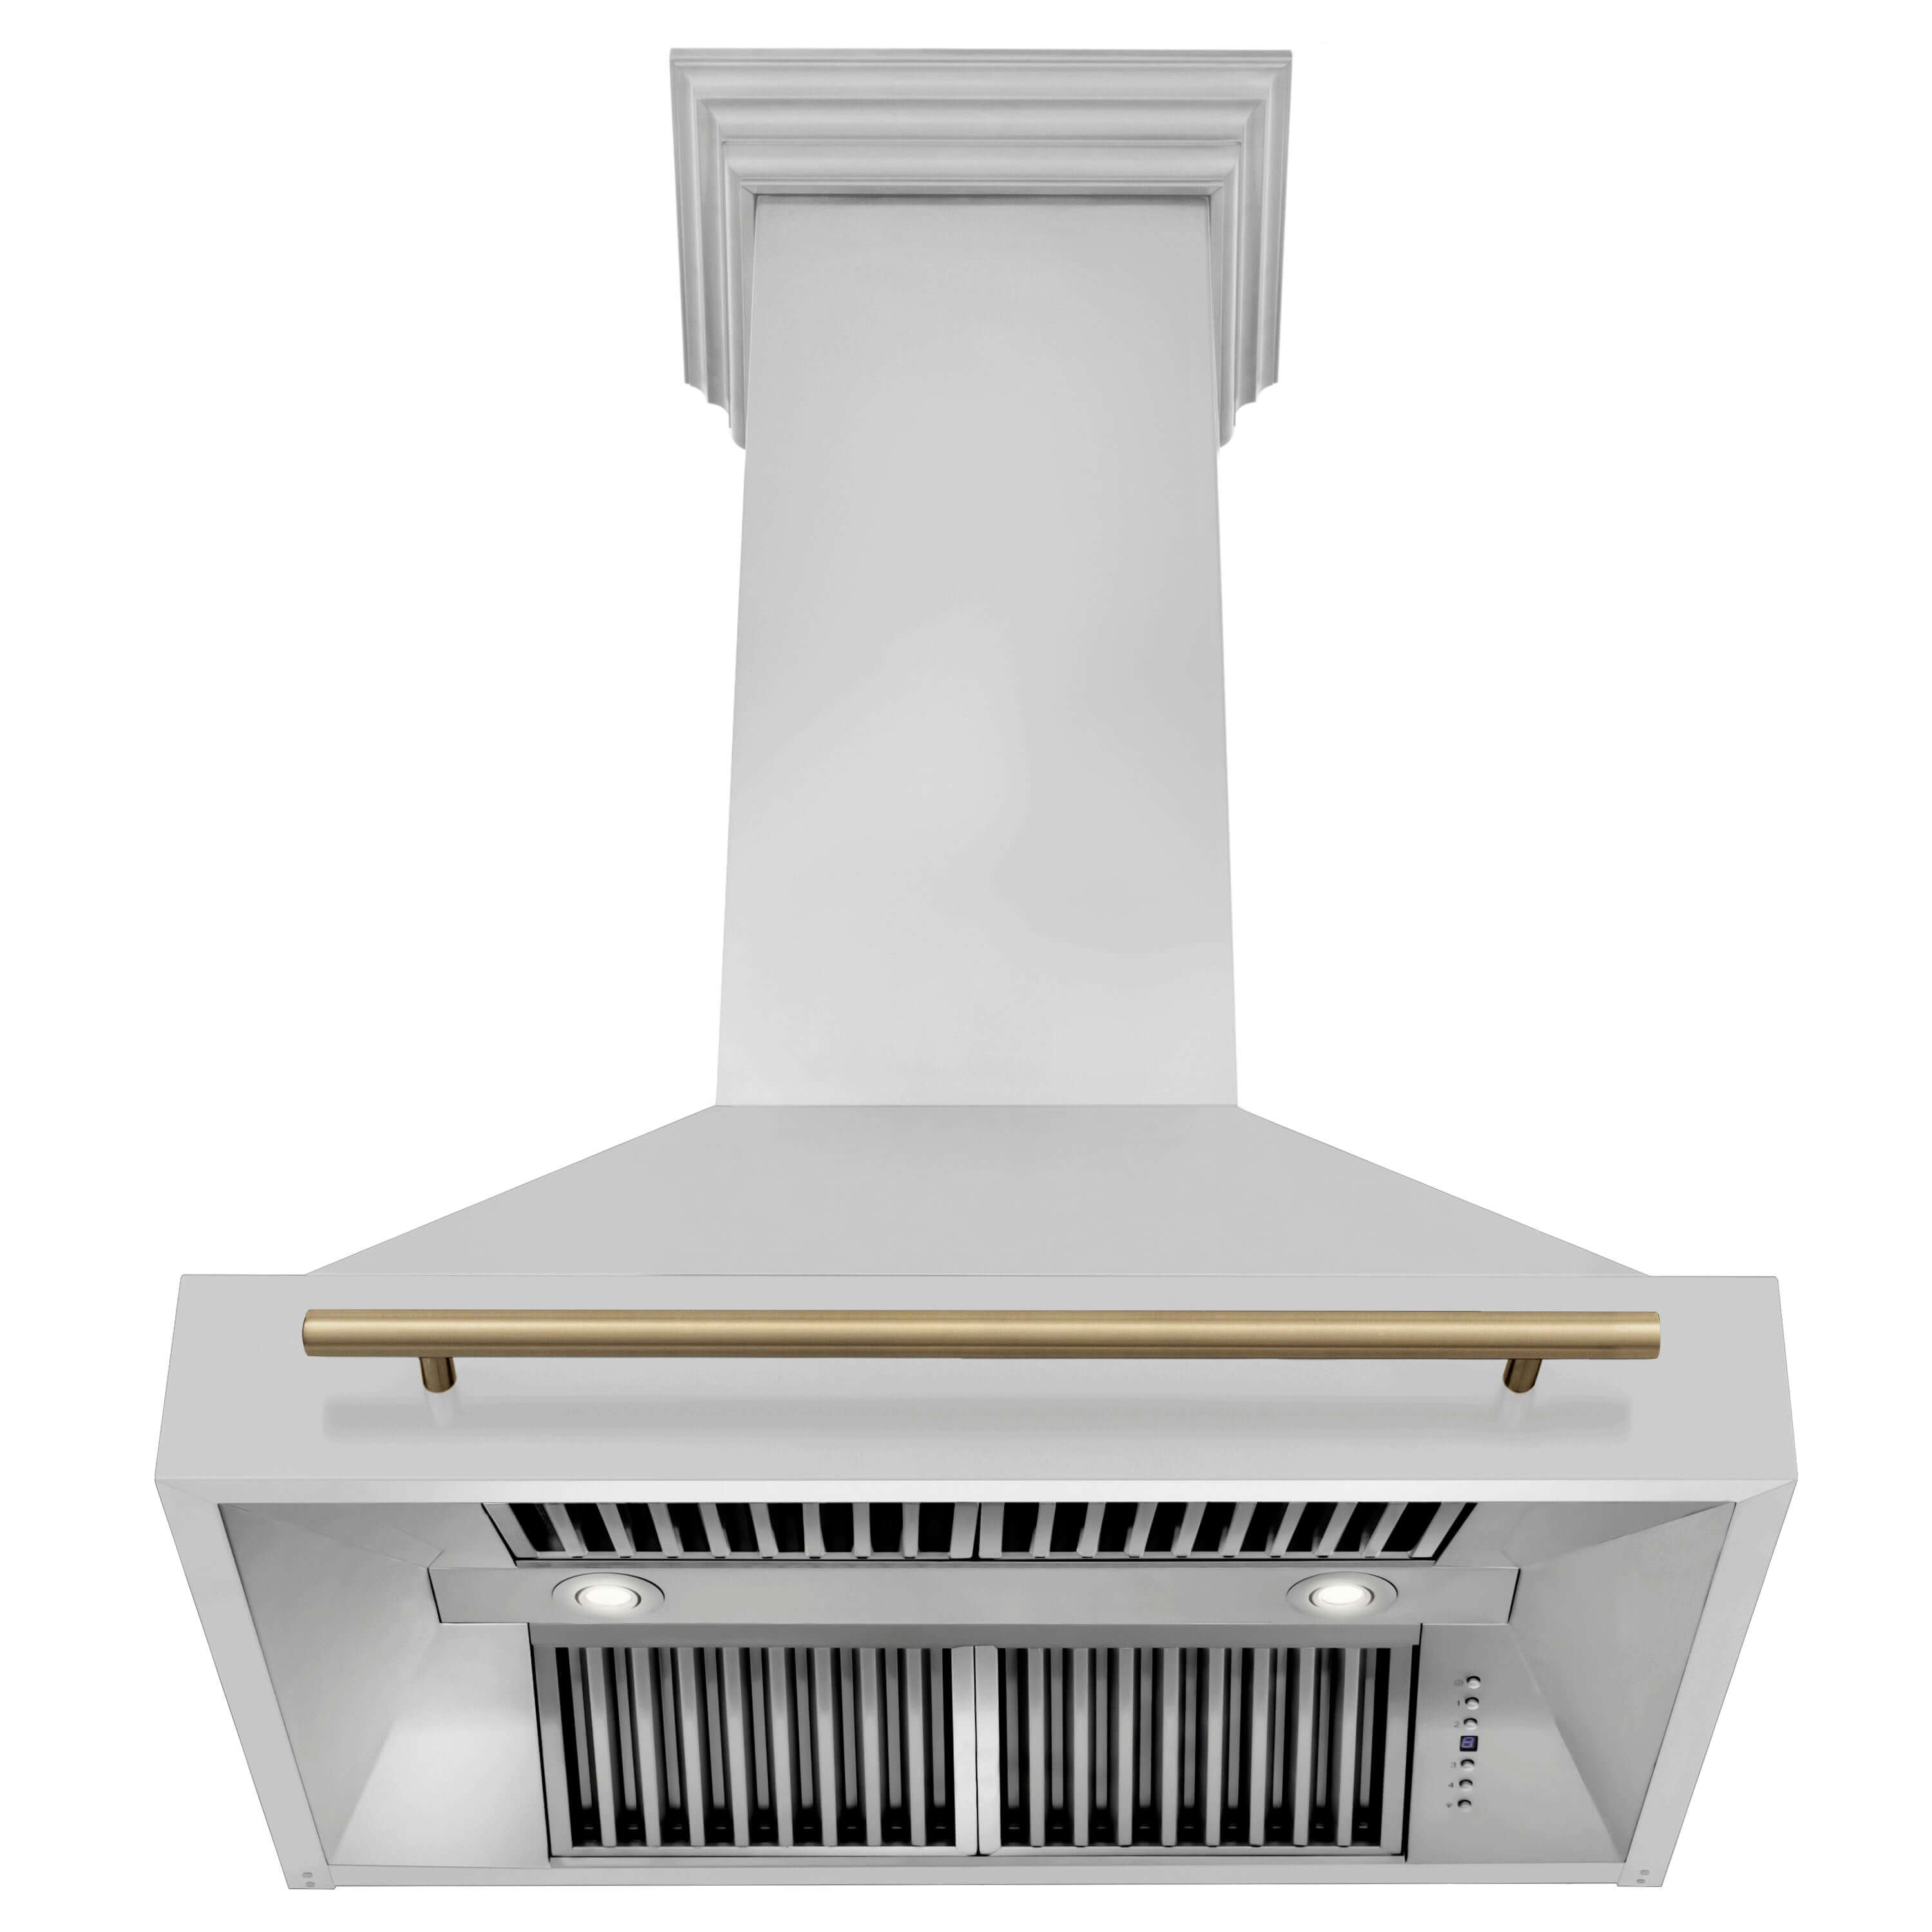 ZLINE Autograph Edition 36 in. Stainless Steel Range Hood with Champagne Bronze Handle front under.